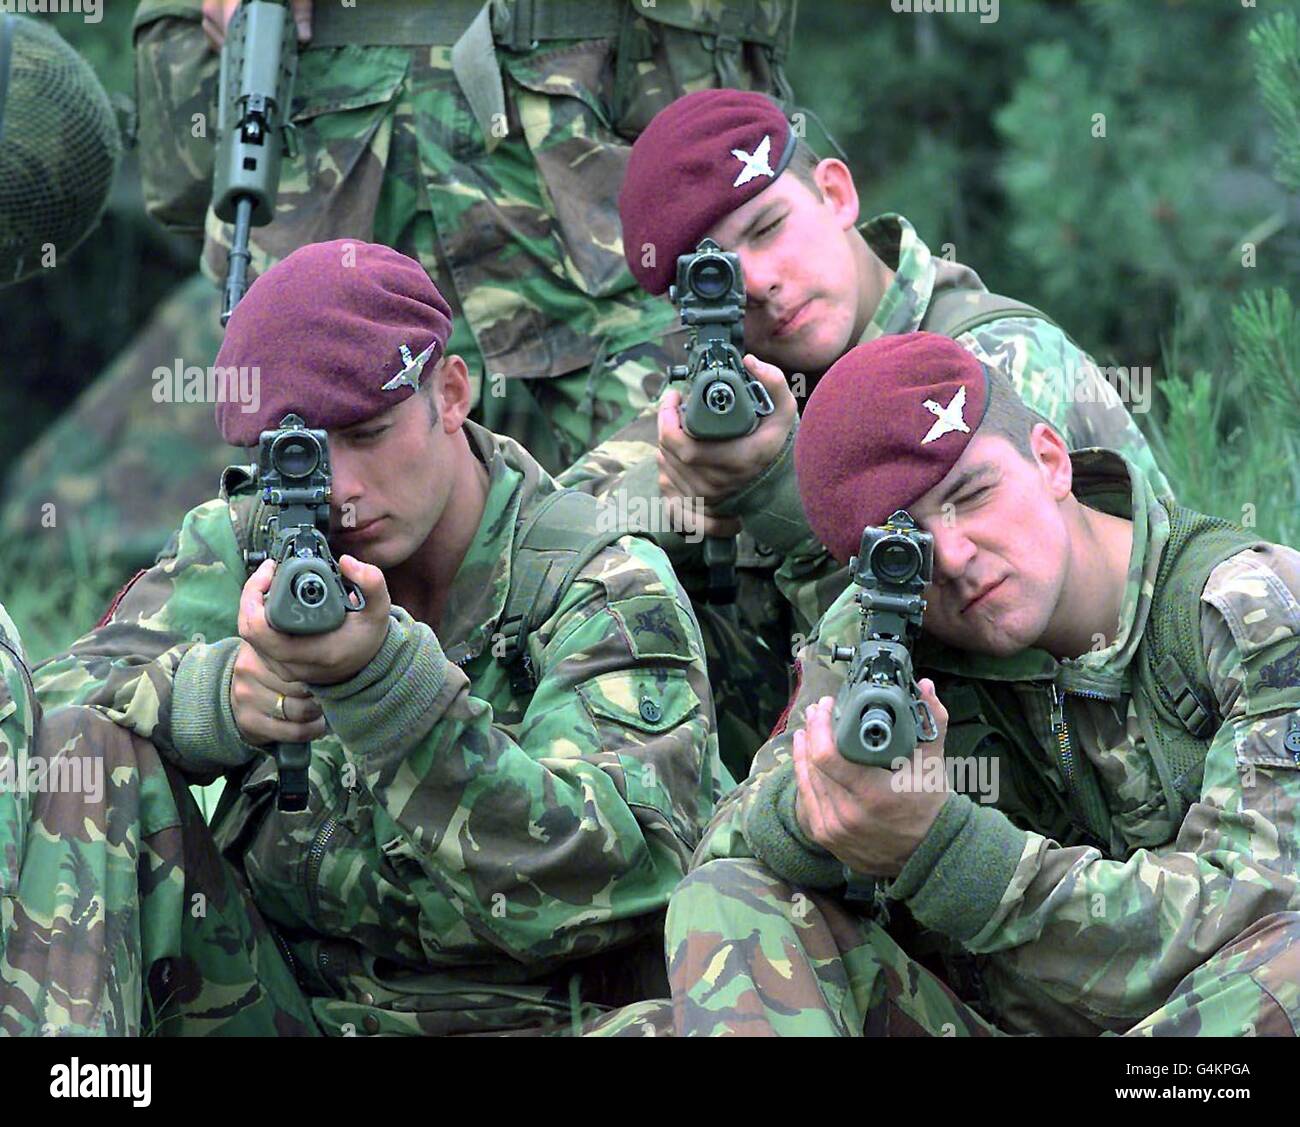 British Soldiers from the 1st Battalion Parachute Regiment train at the Petrovic Army Base, in Macedonia. They are amongst the forces that are prepared to move into Kosovo in the event of an agreement between Nato and Yugoslavia. Stock Photo